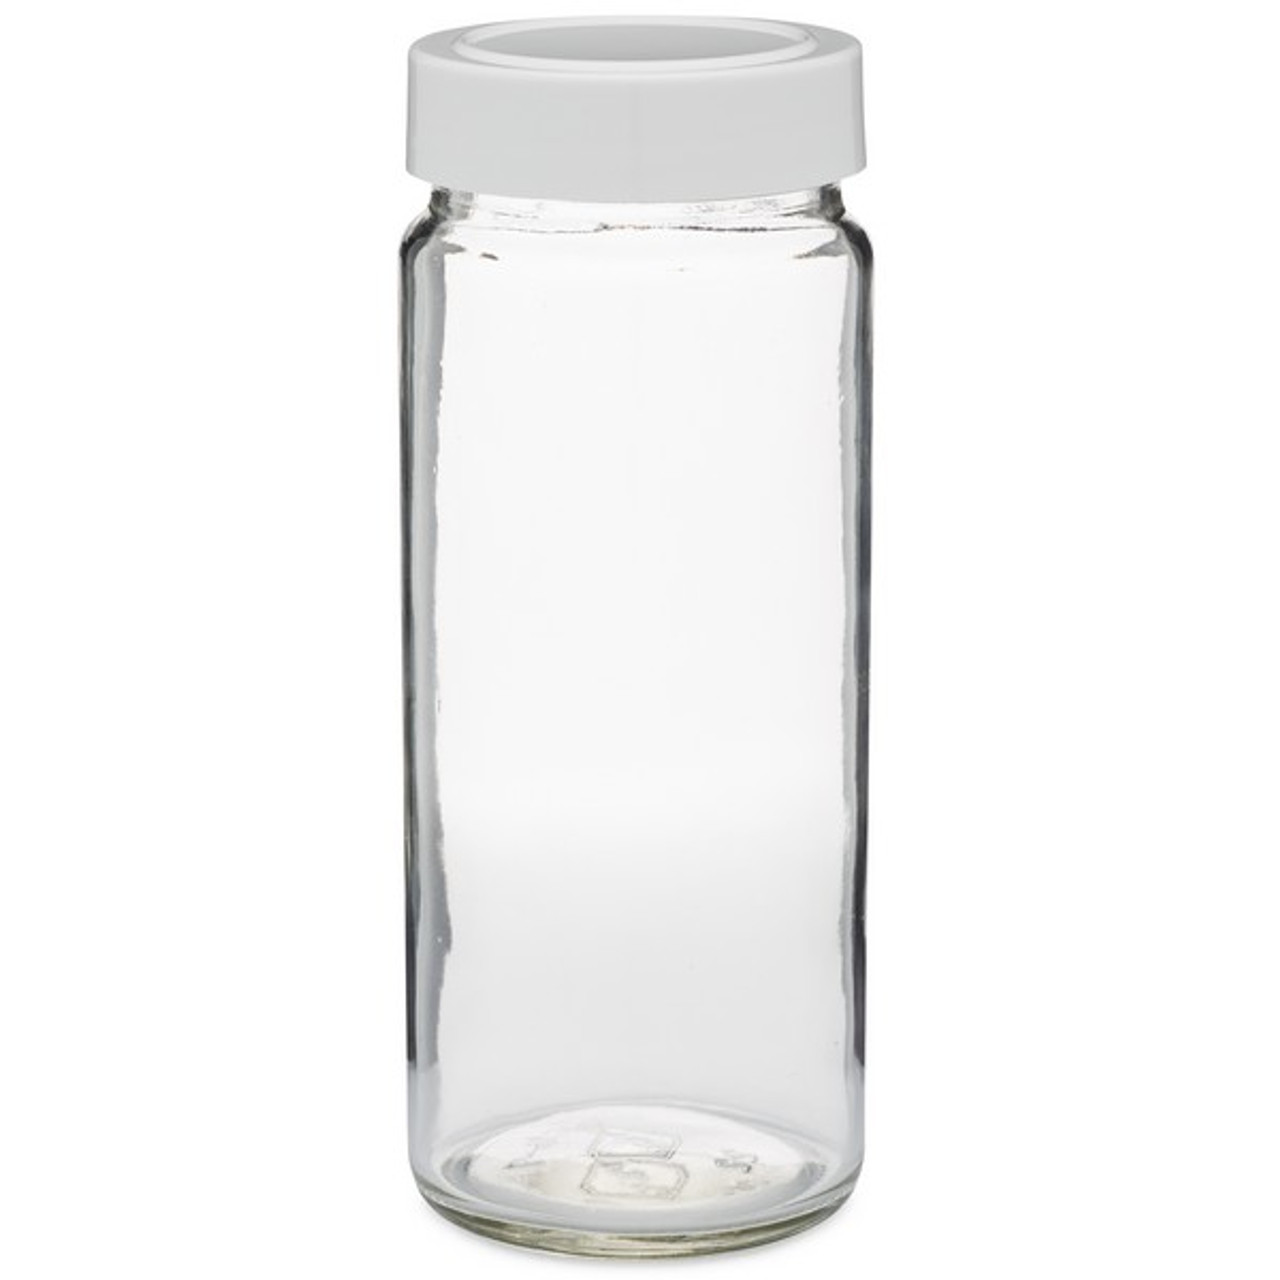 16oz Clear Glass Paragon Spice Jars - 12/Case, Clear Type III 63-400